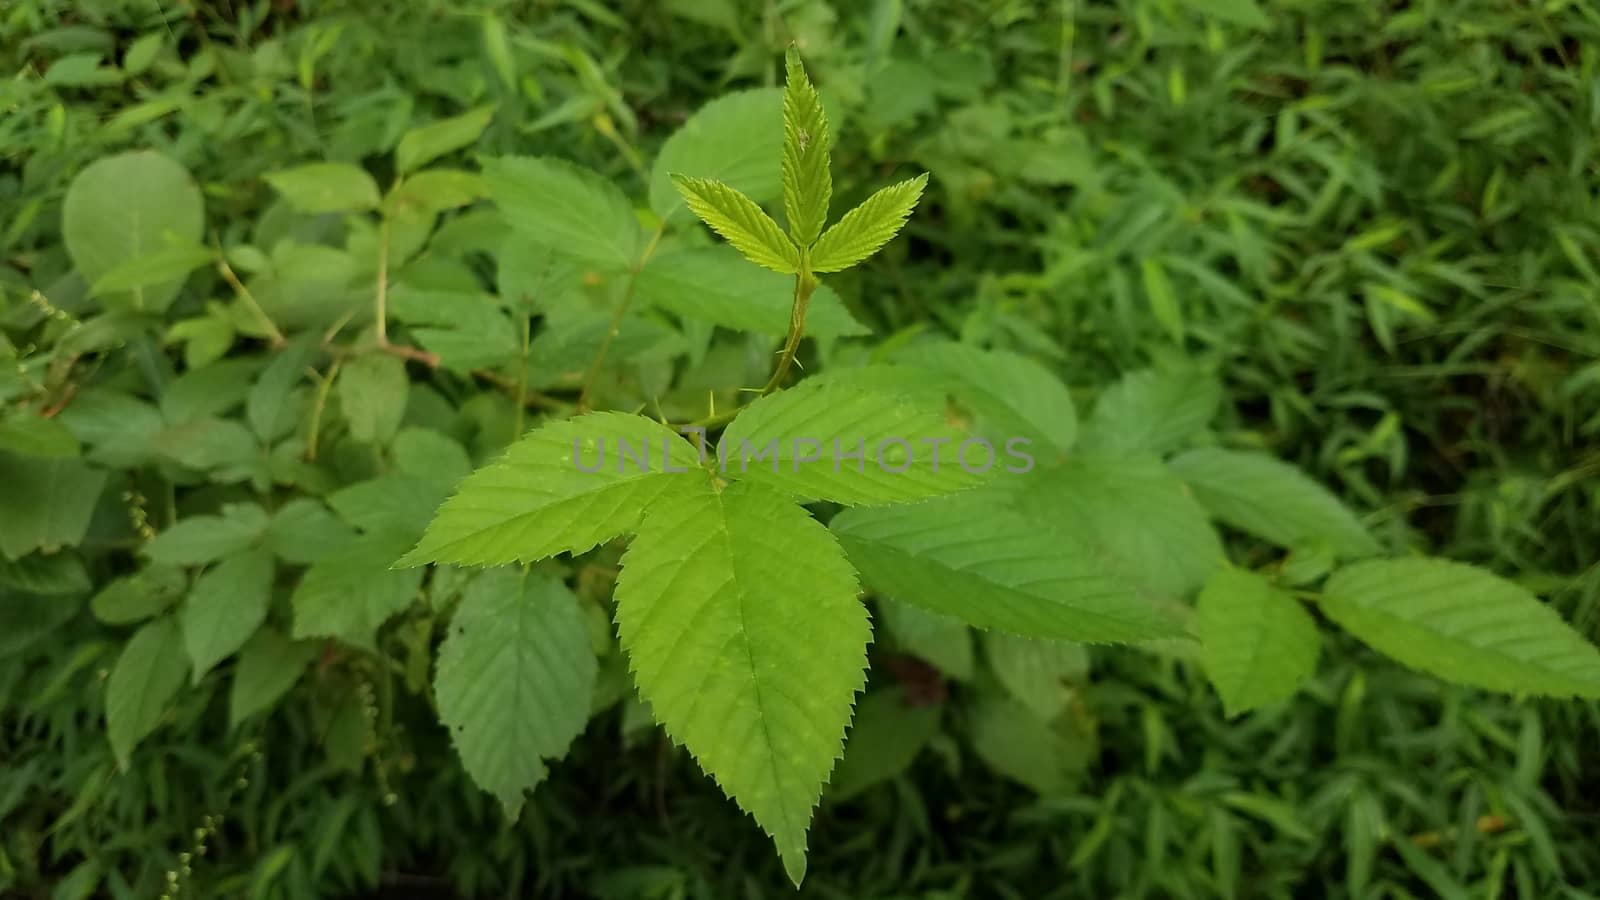 poison ivy plant weed with green leaves and thorns